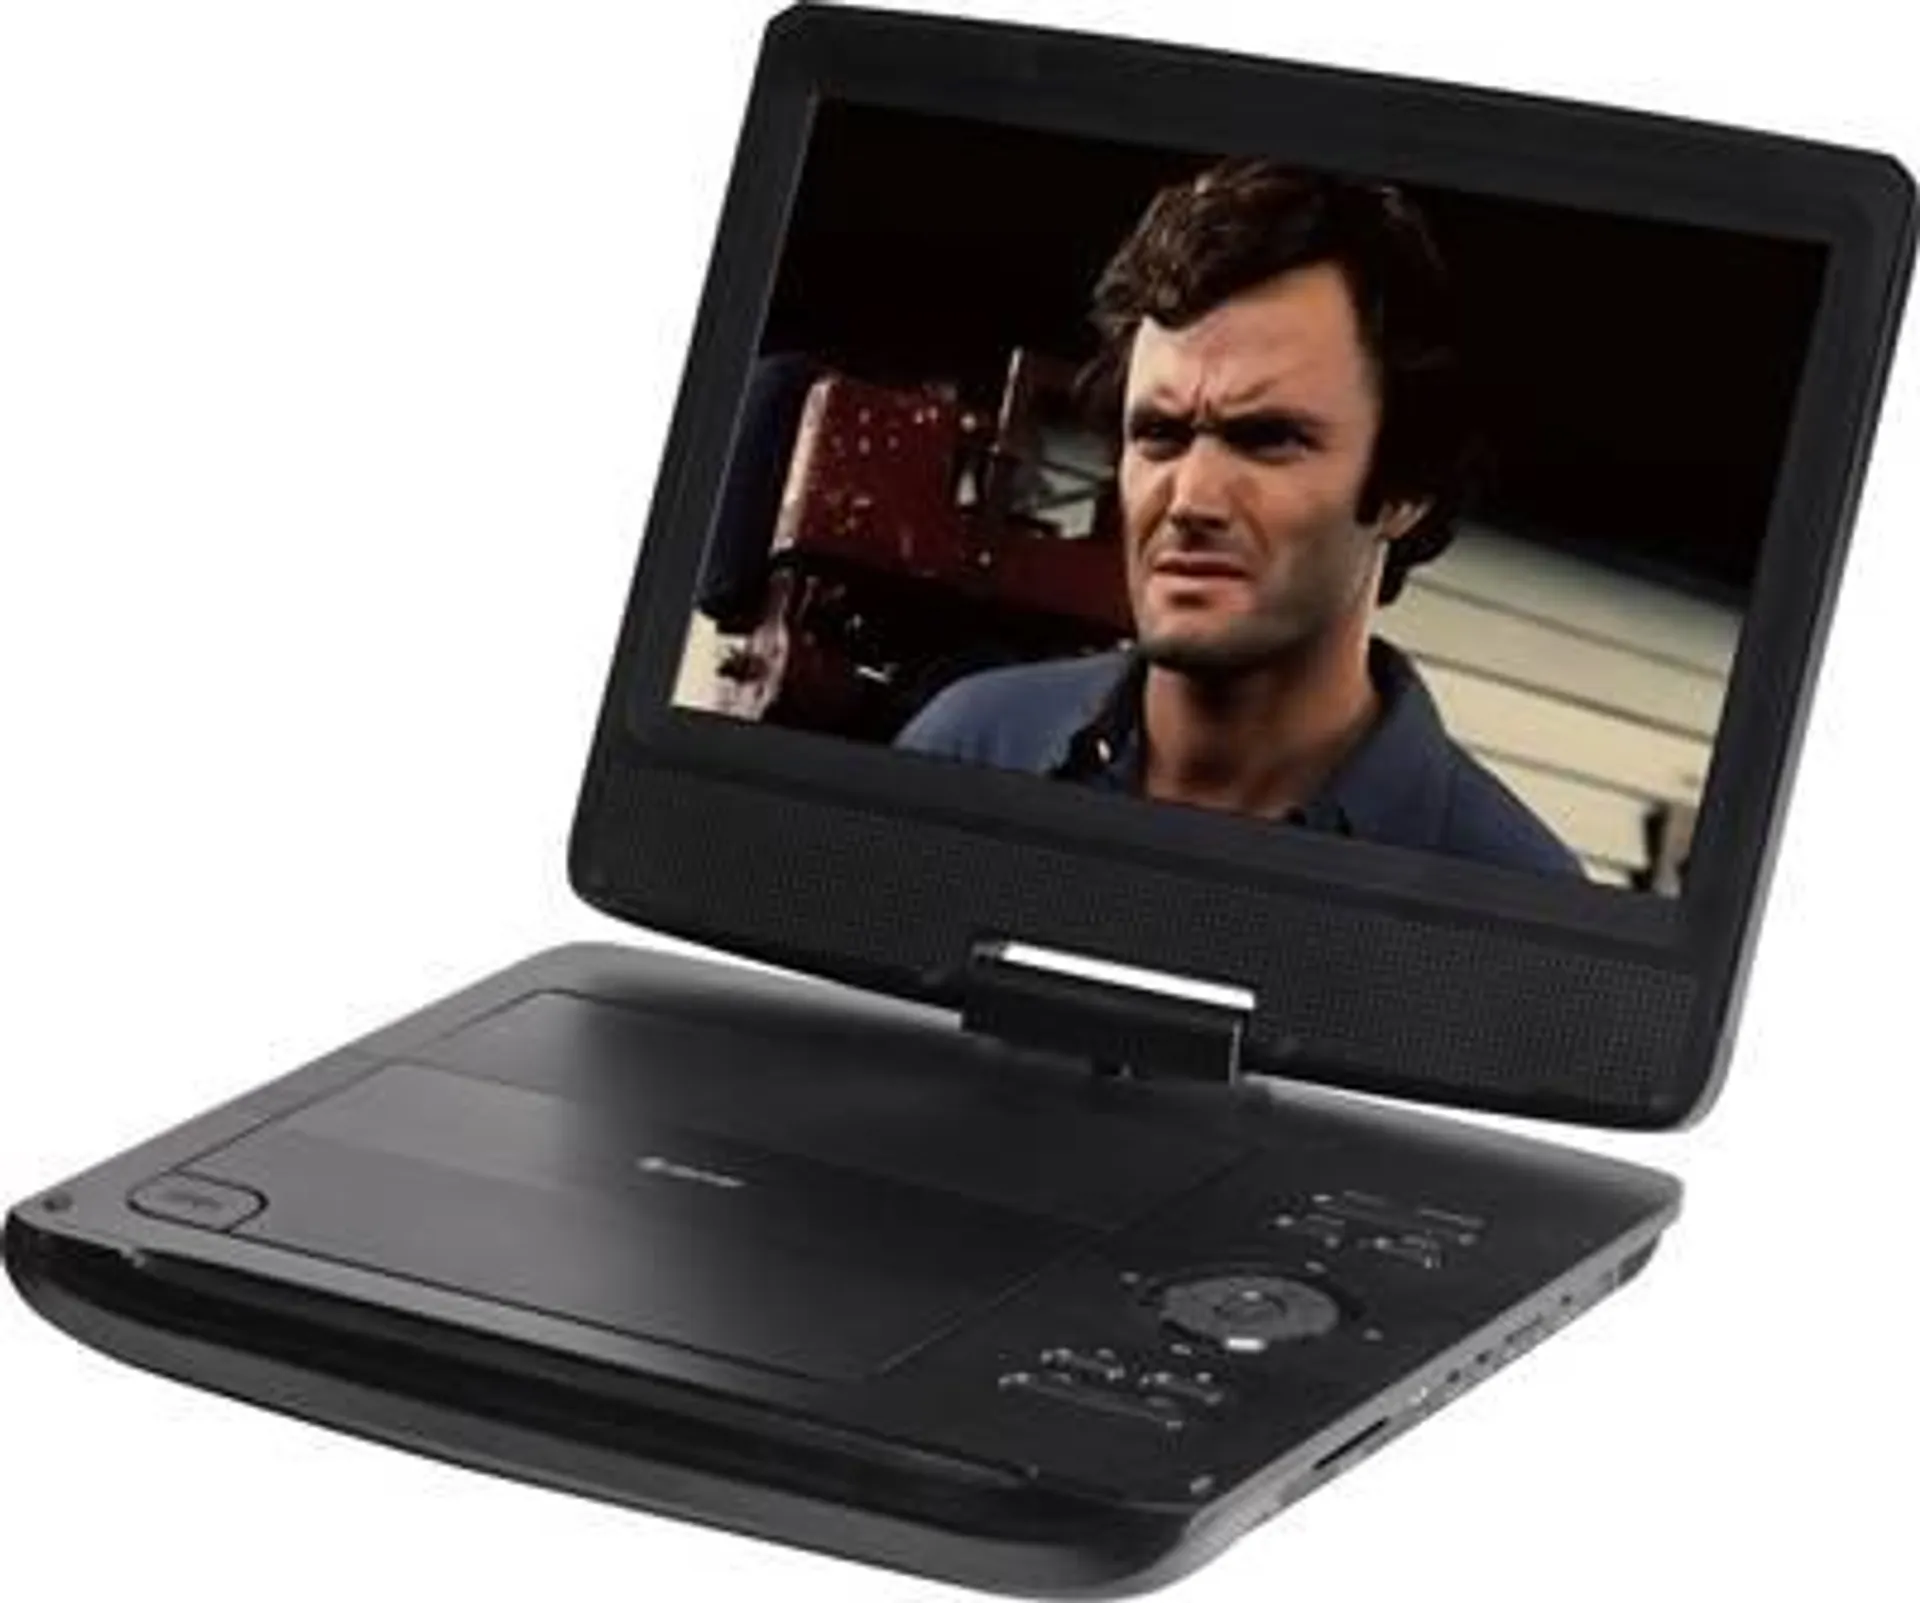 Denver MT-1097 Portable DVD player 25.4 cm 10 inch EEC: C (A - G) Battery-powered, incl. 12V car power cable Black